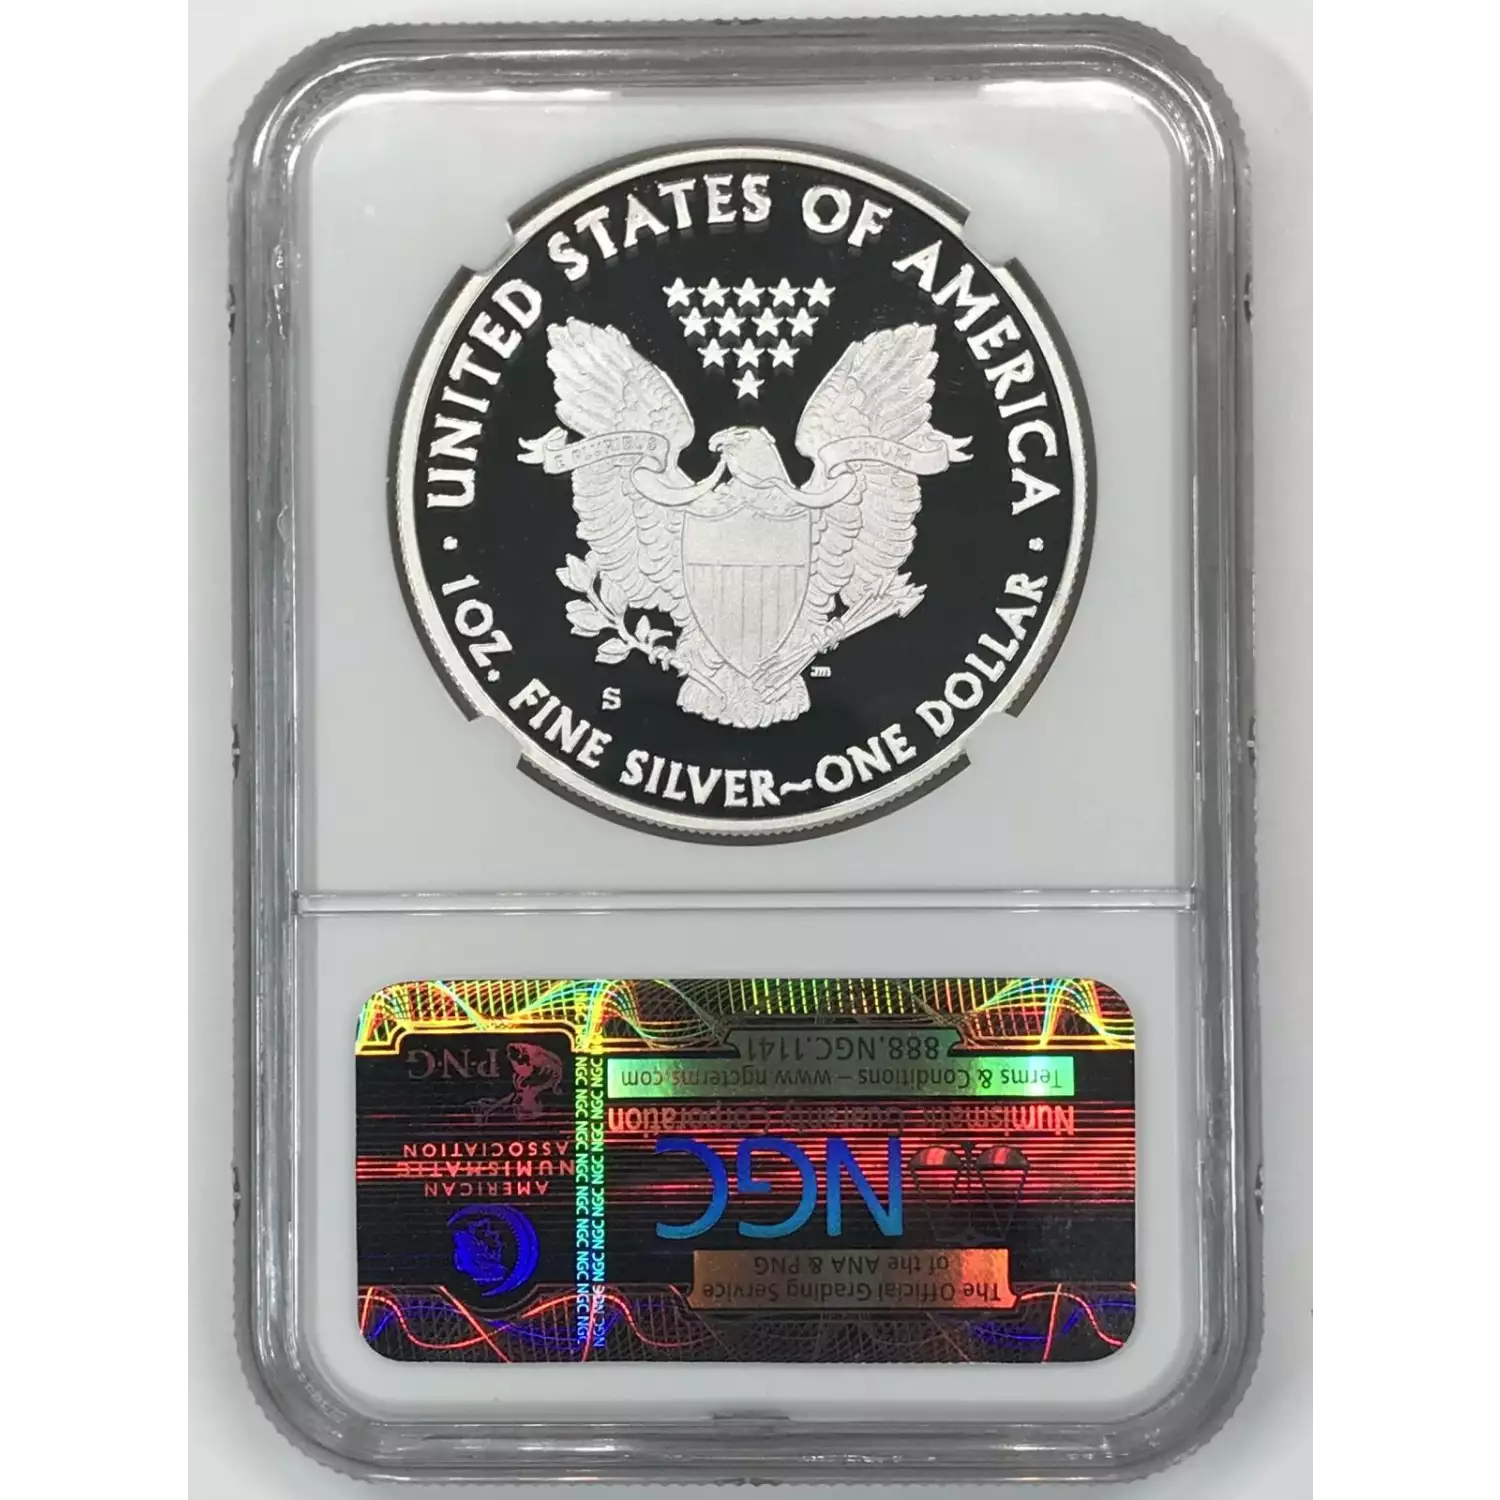 2012 S SAN FRANCISCO EAGLE SET EARLY RELEASES OFFICIAL US MINT SET ULTRA CAMEO (3)